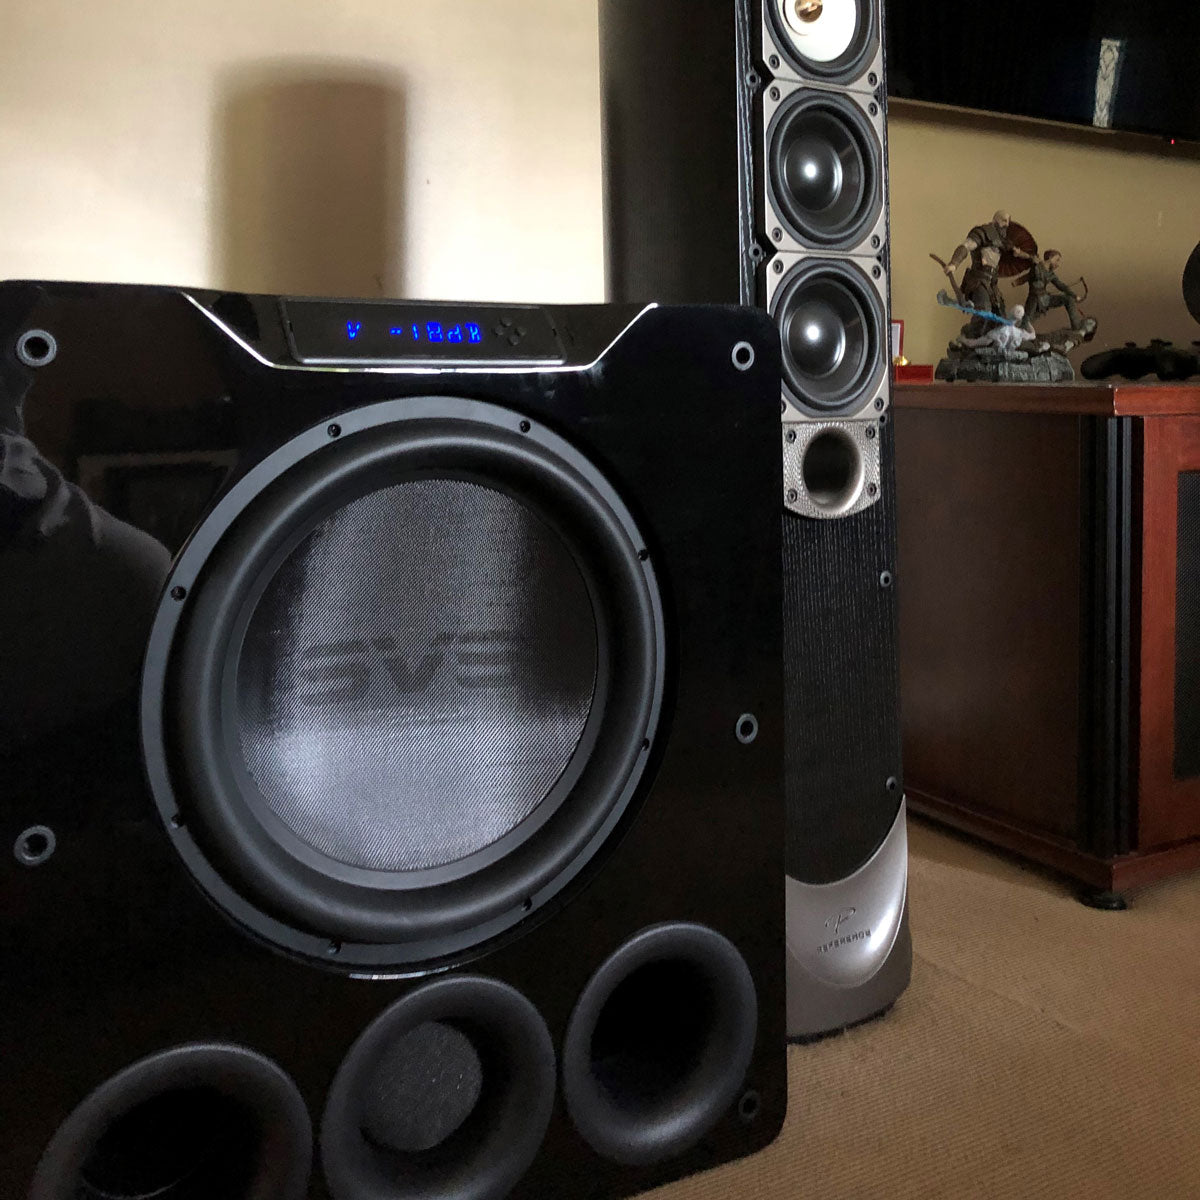 Texas Home Theater Fan Blends Different SVS Subwoofers To “Feel Things Like Never Before”